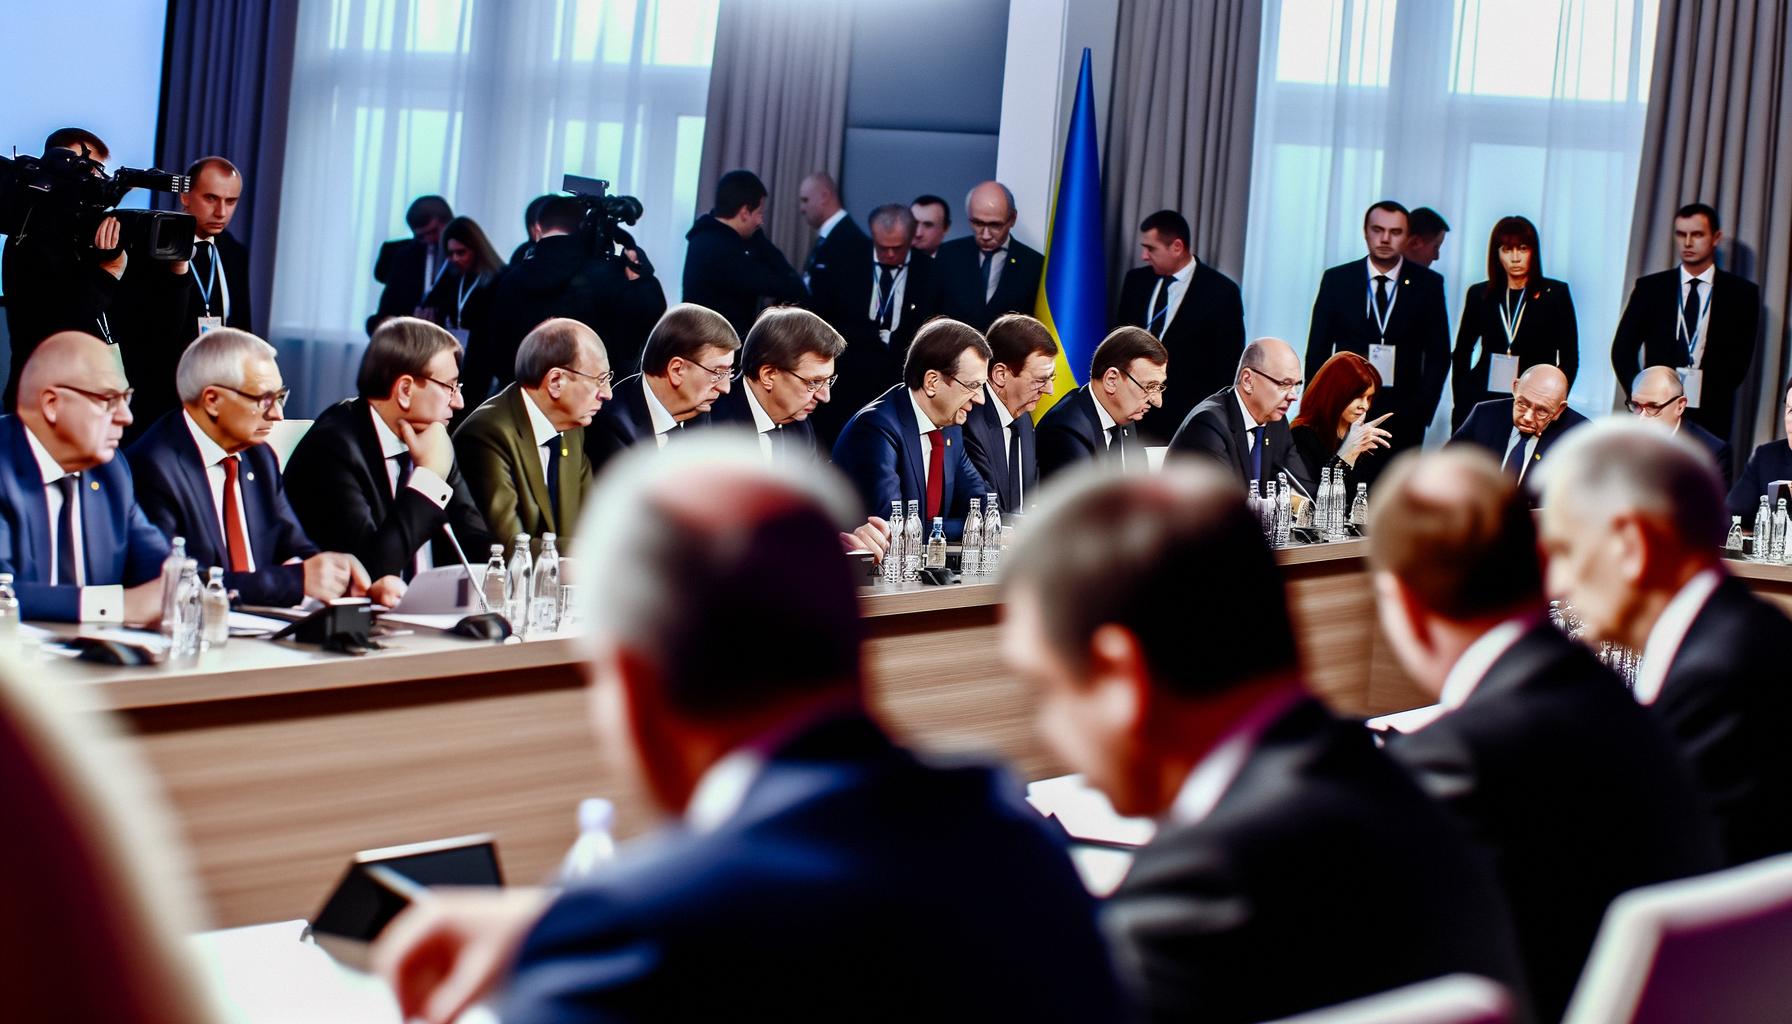 Significant progress stalled at Ukraine peace summit due to Russian absence.